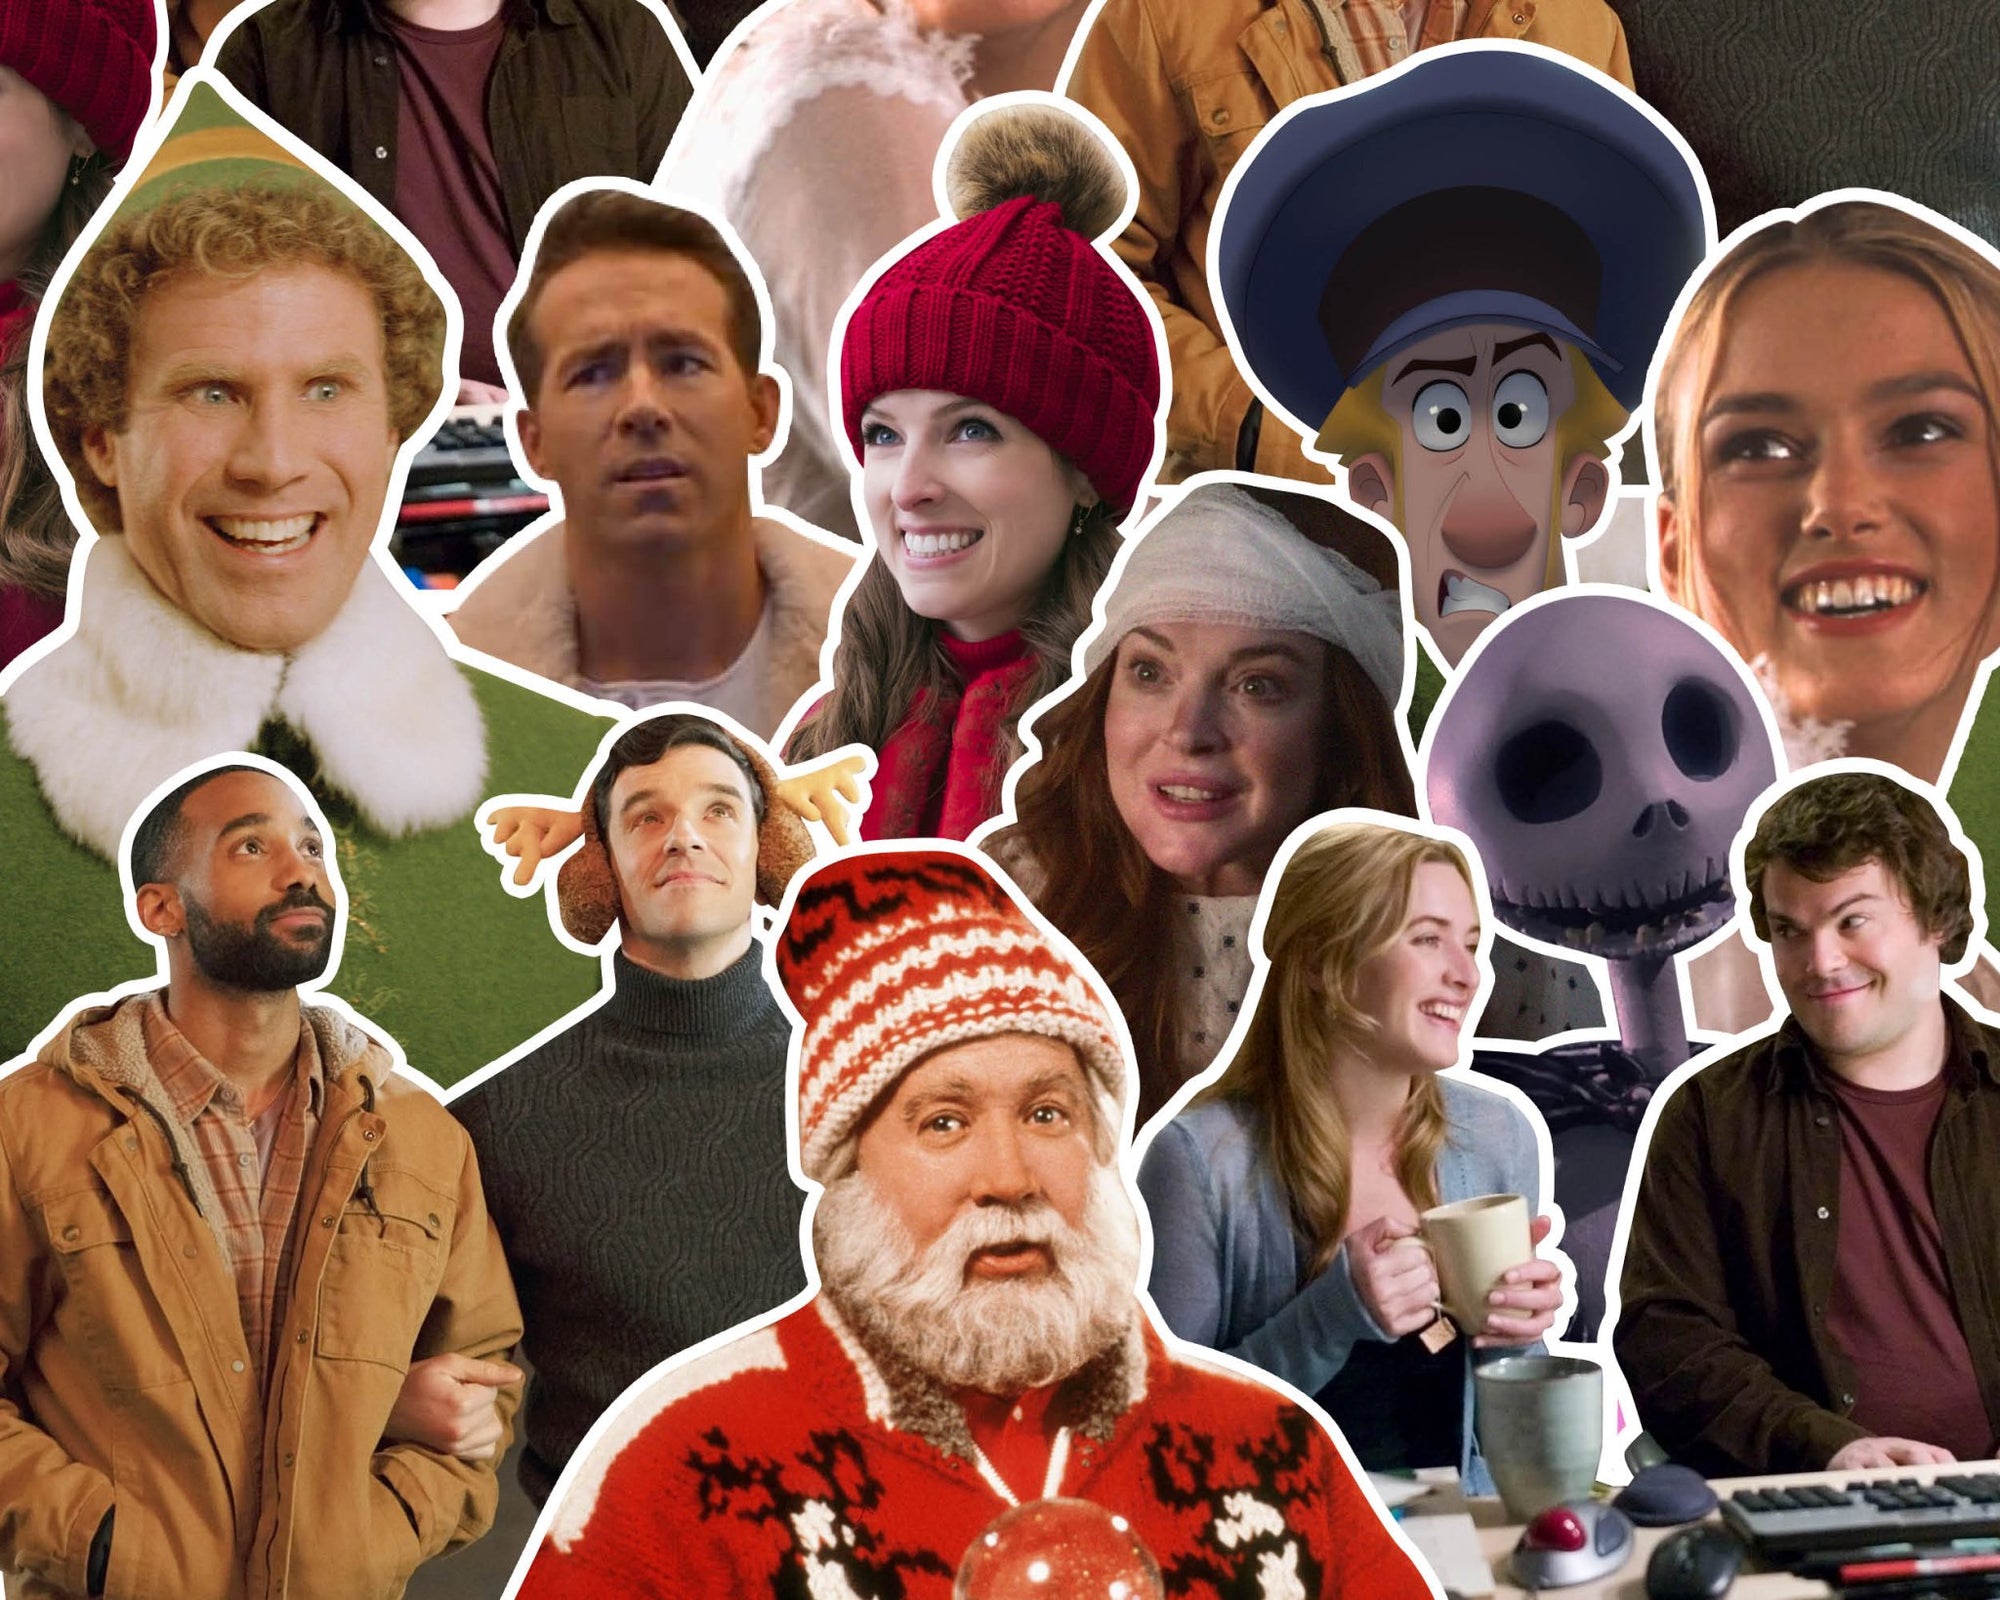 10 Christmas movies you simply HAVE to watch this festive season (in no particular order) - George Haircare